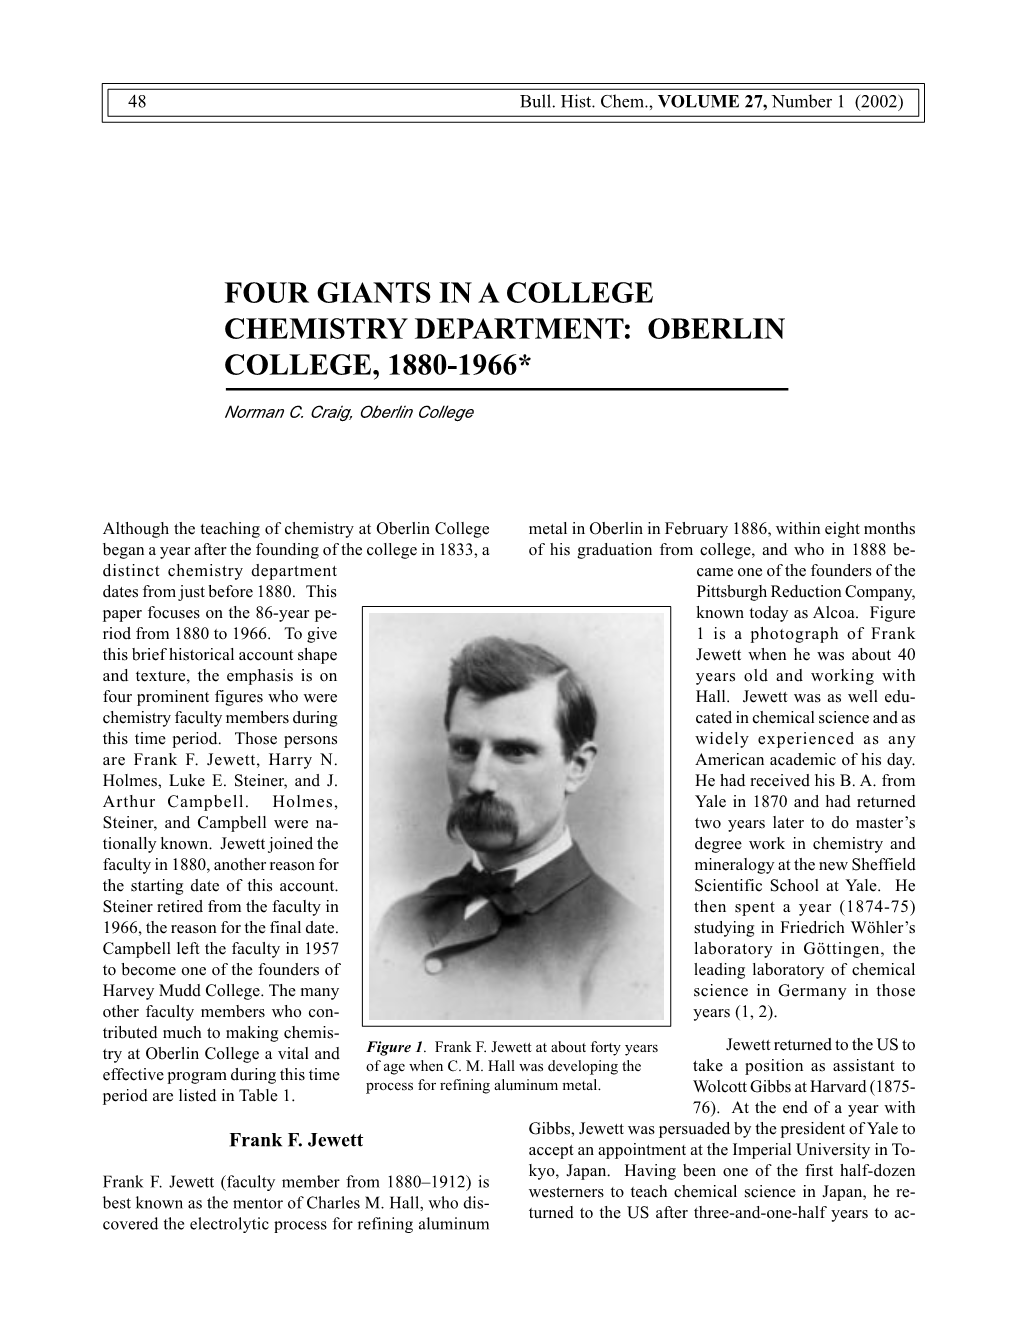 Four Giants in a College Chemistry Department: Oberlin College, 1880-1966*